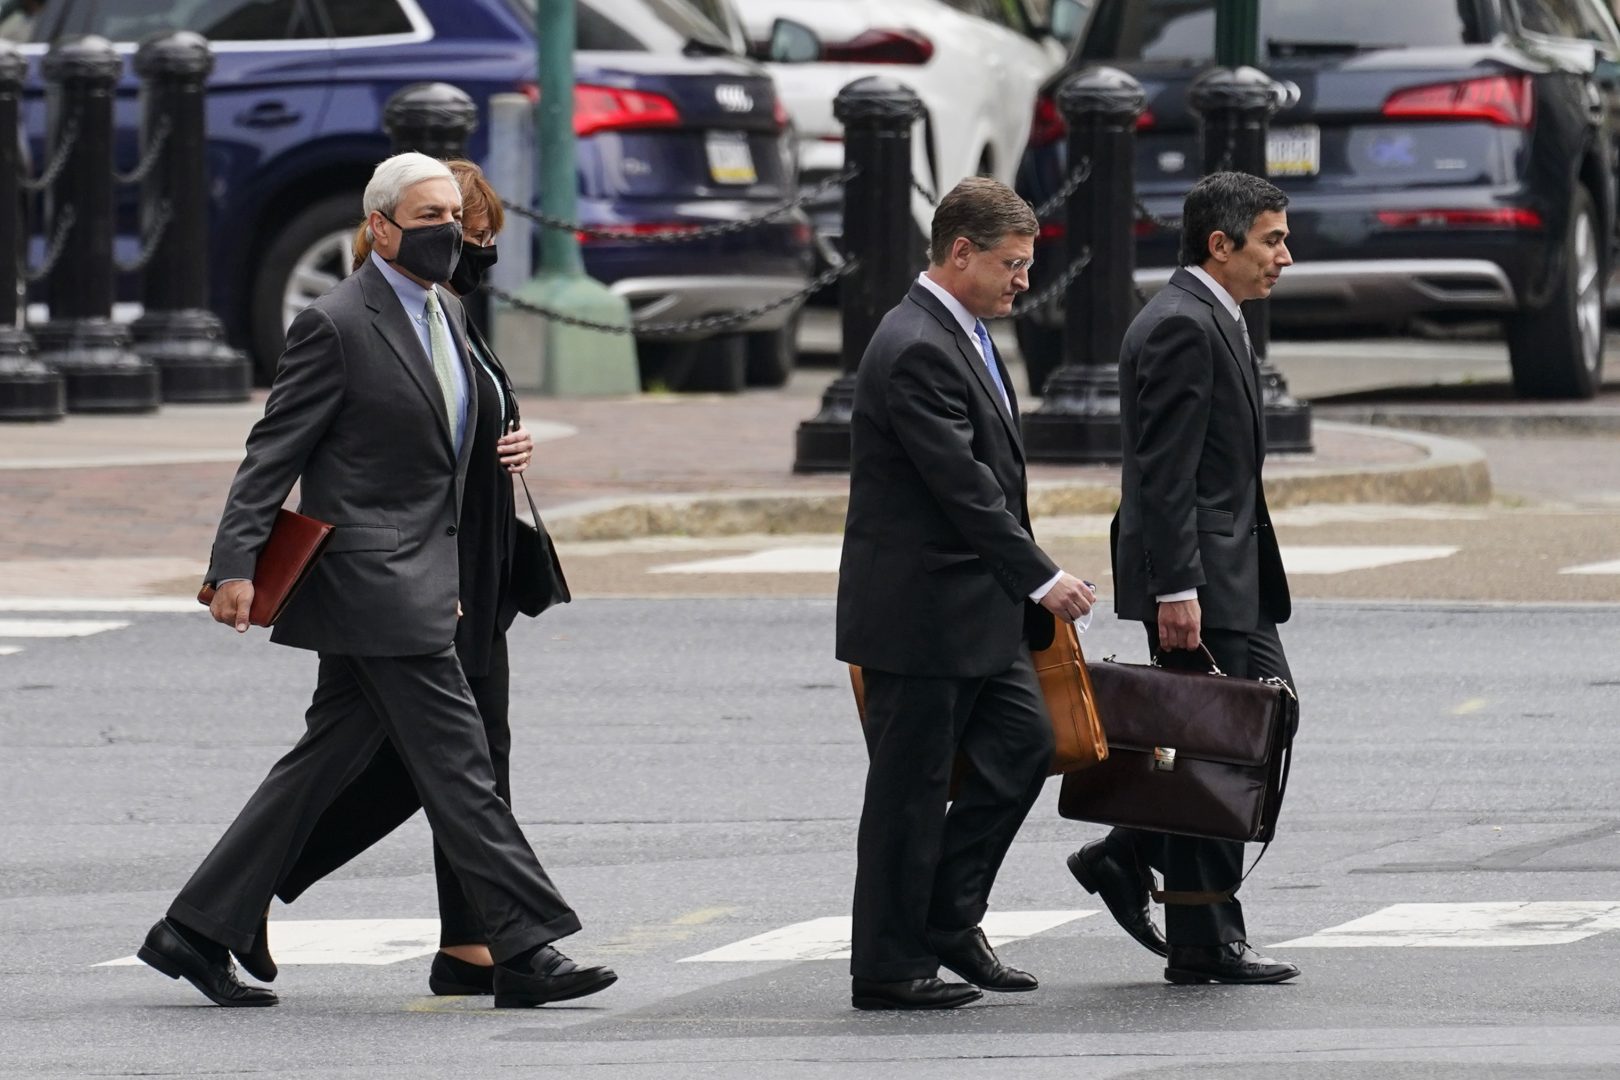 Former Penn State President Graham Spanier, left, walks to his hearing at the Dauphin County Courthouse in Harrisburg, Pa., Wednesday, May 26, 2021.   A judge will determine if and when Spanier must report to jail to begin serving time for a single misdemeanor conviction of endangering the welfare of children.